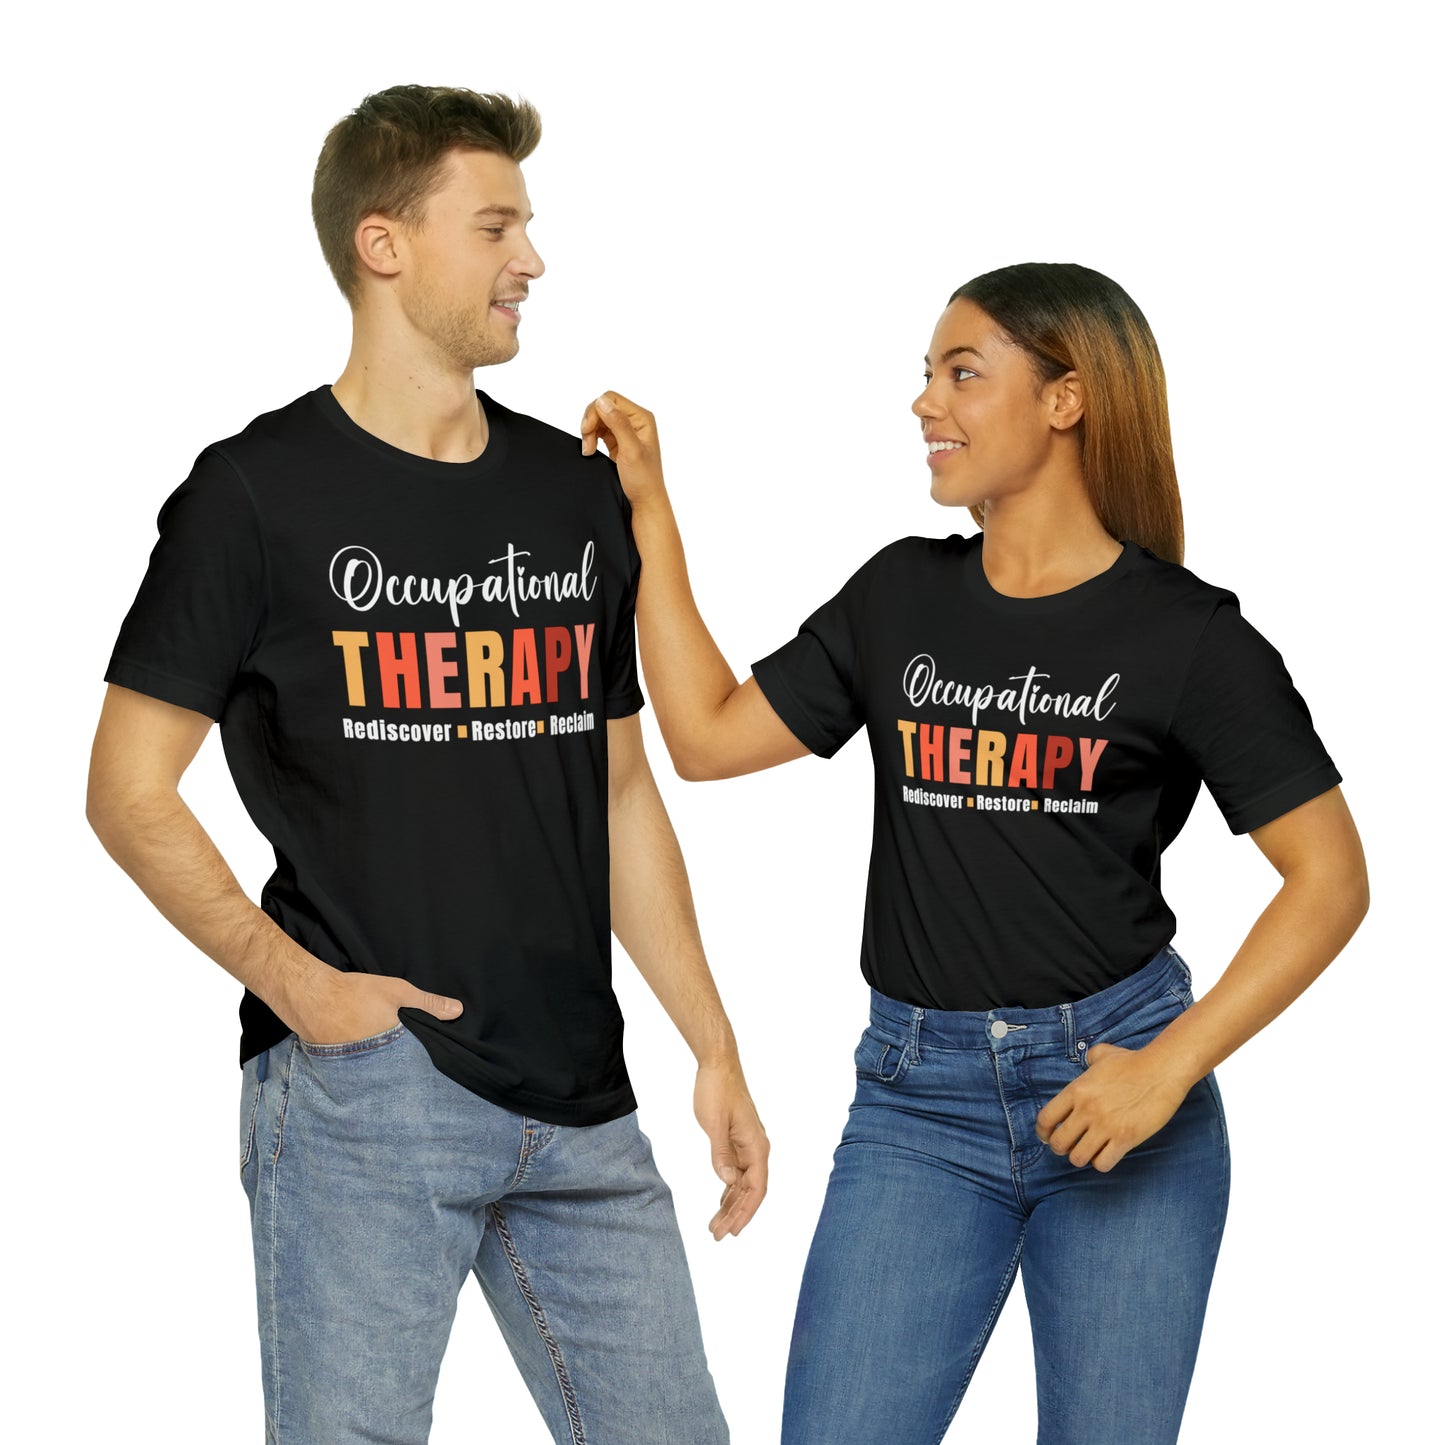 Occupational therapy shirt gift for occupational therapists therapy shirt gift men gift for women therapists therapy job gift tshirt